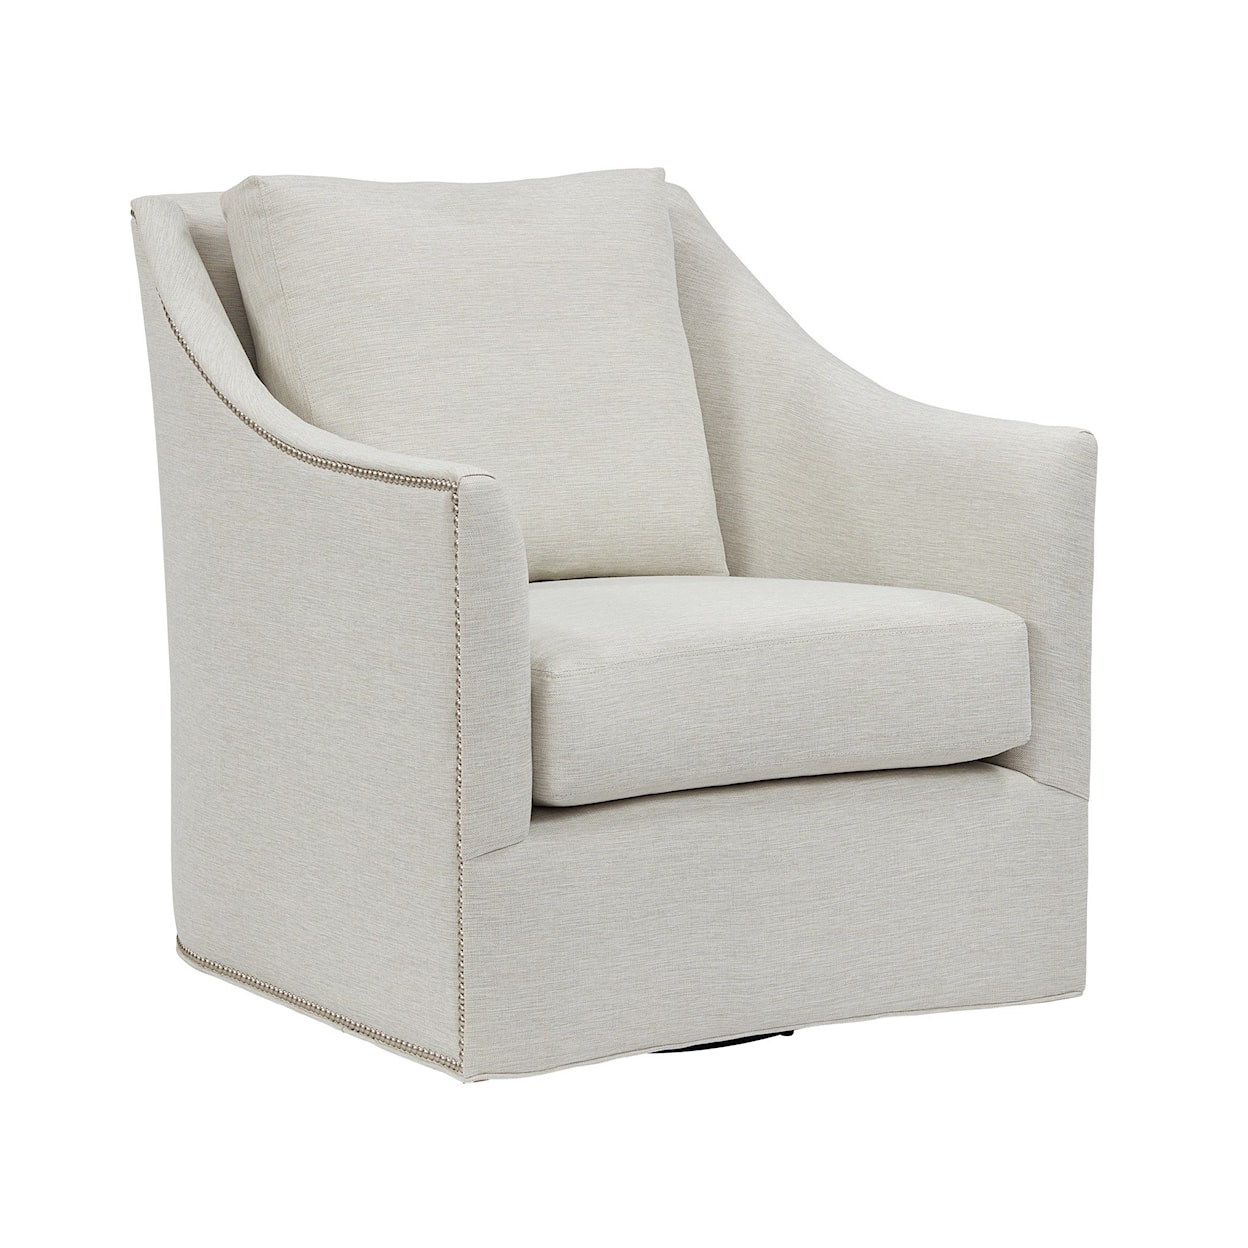 Universal Special Order Walter Swivel Chair